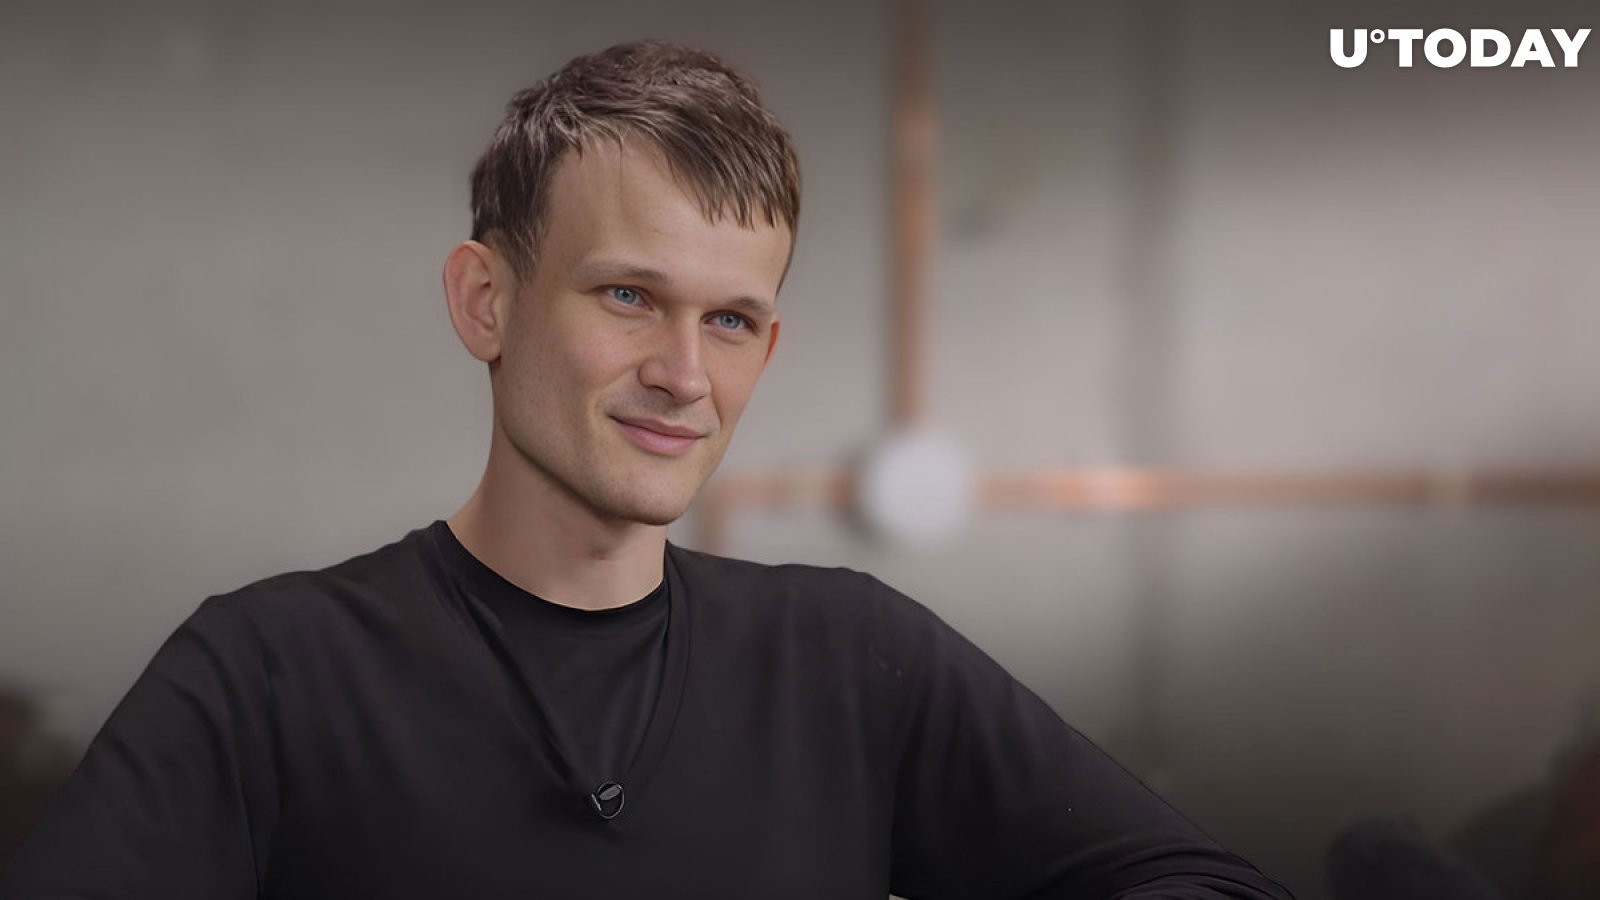 Ethereum's Vitalik Buterin Raises Concerns Over Privacy in Modern Cars